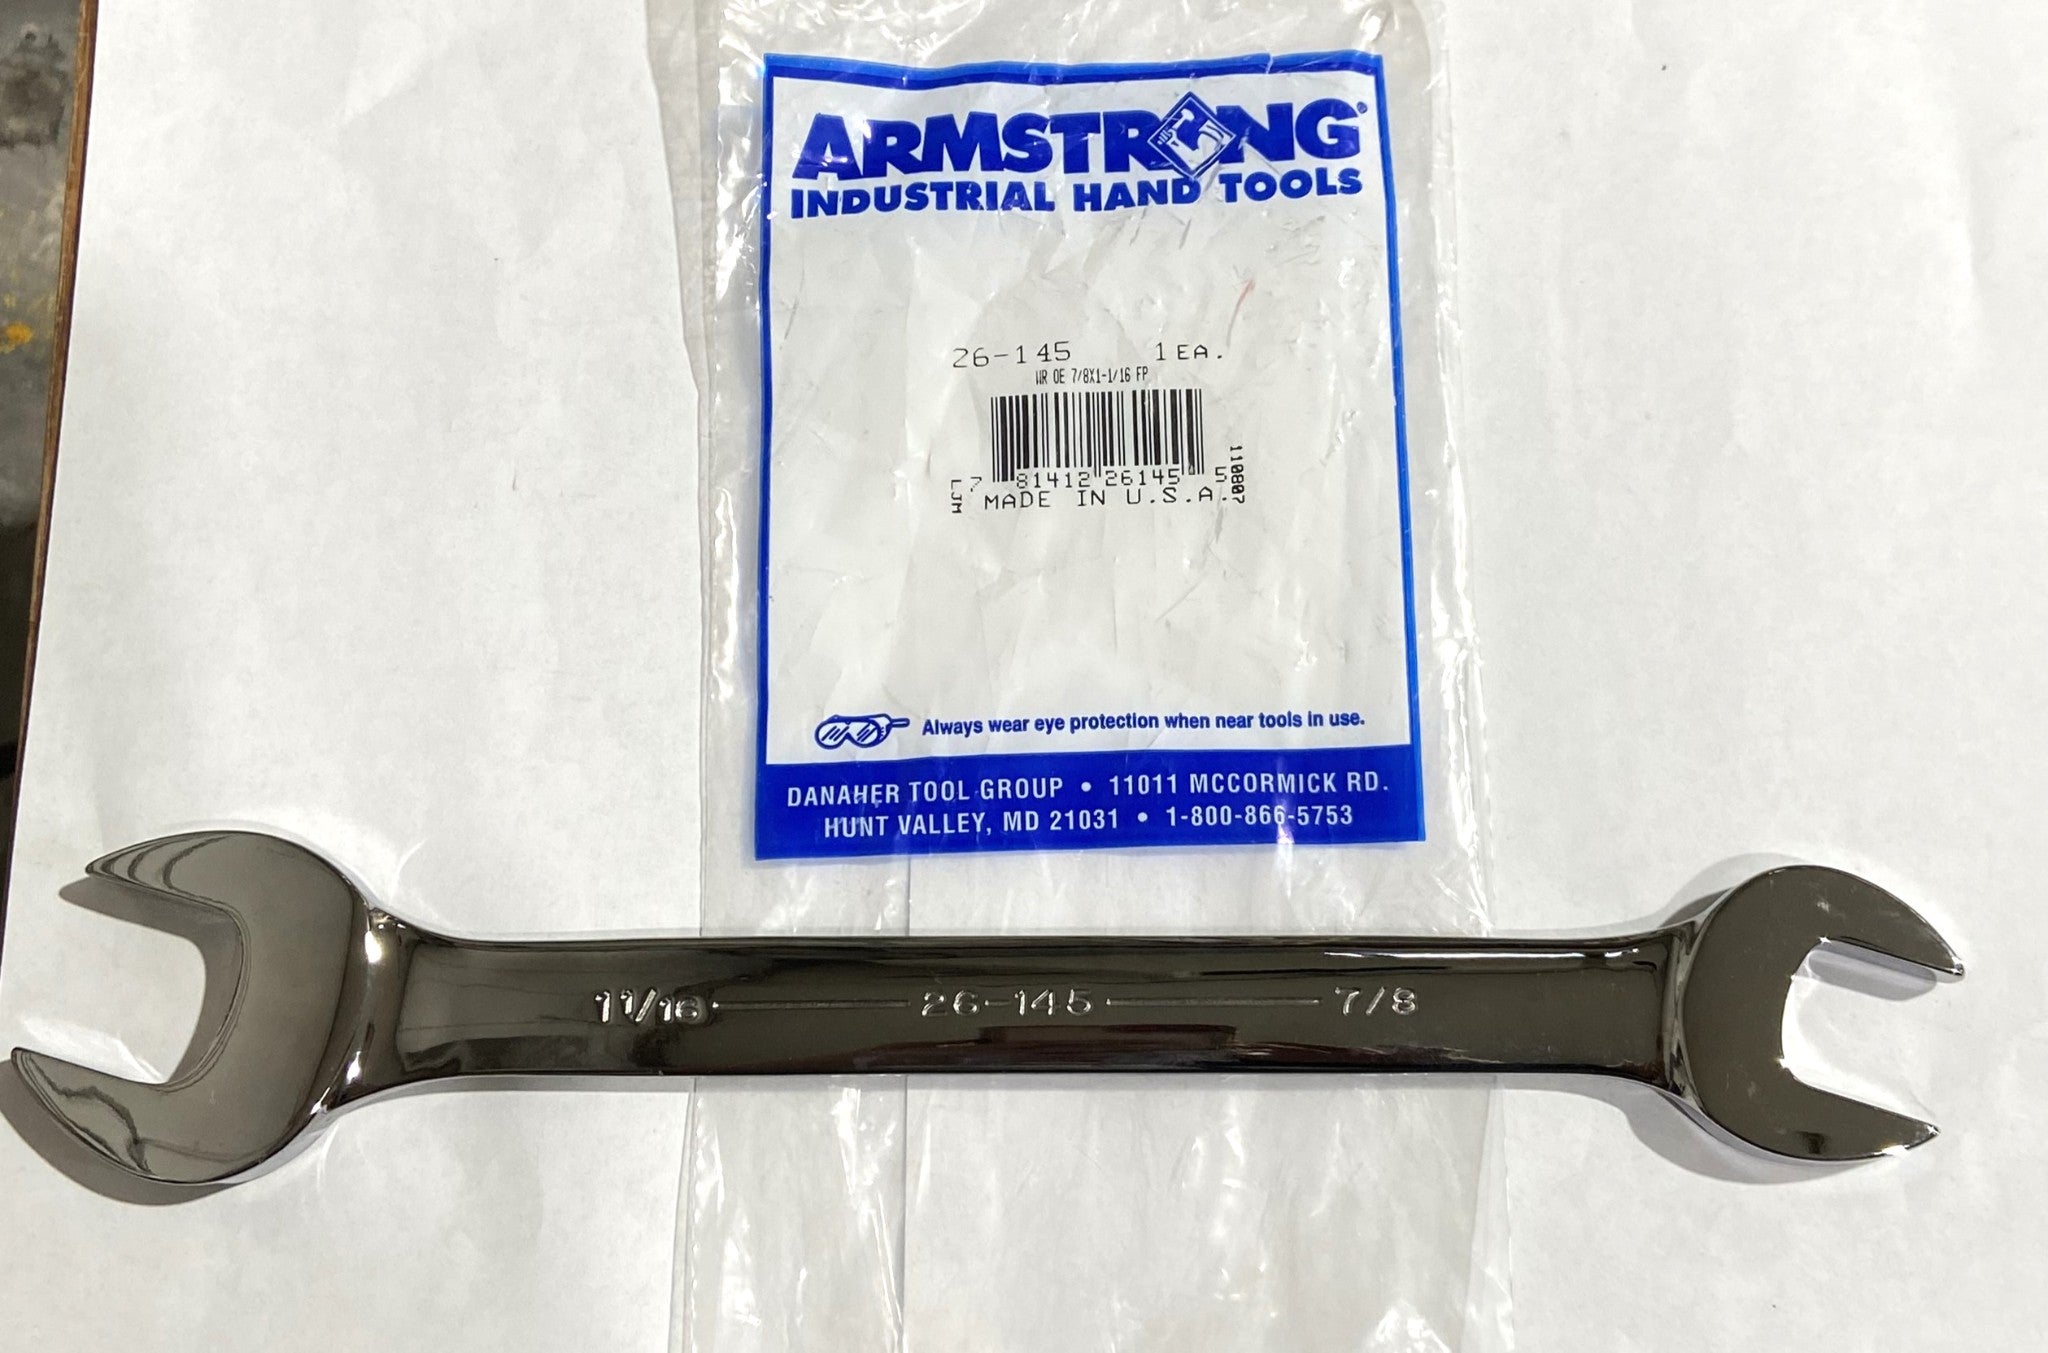 Armstrong Tools 26-145, Open End Wrench 7/8 X 1-1/16" USA #6